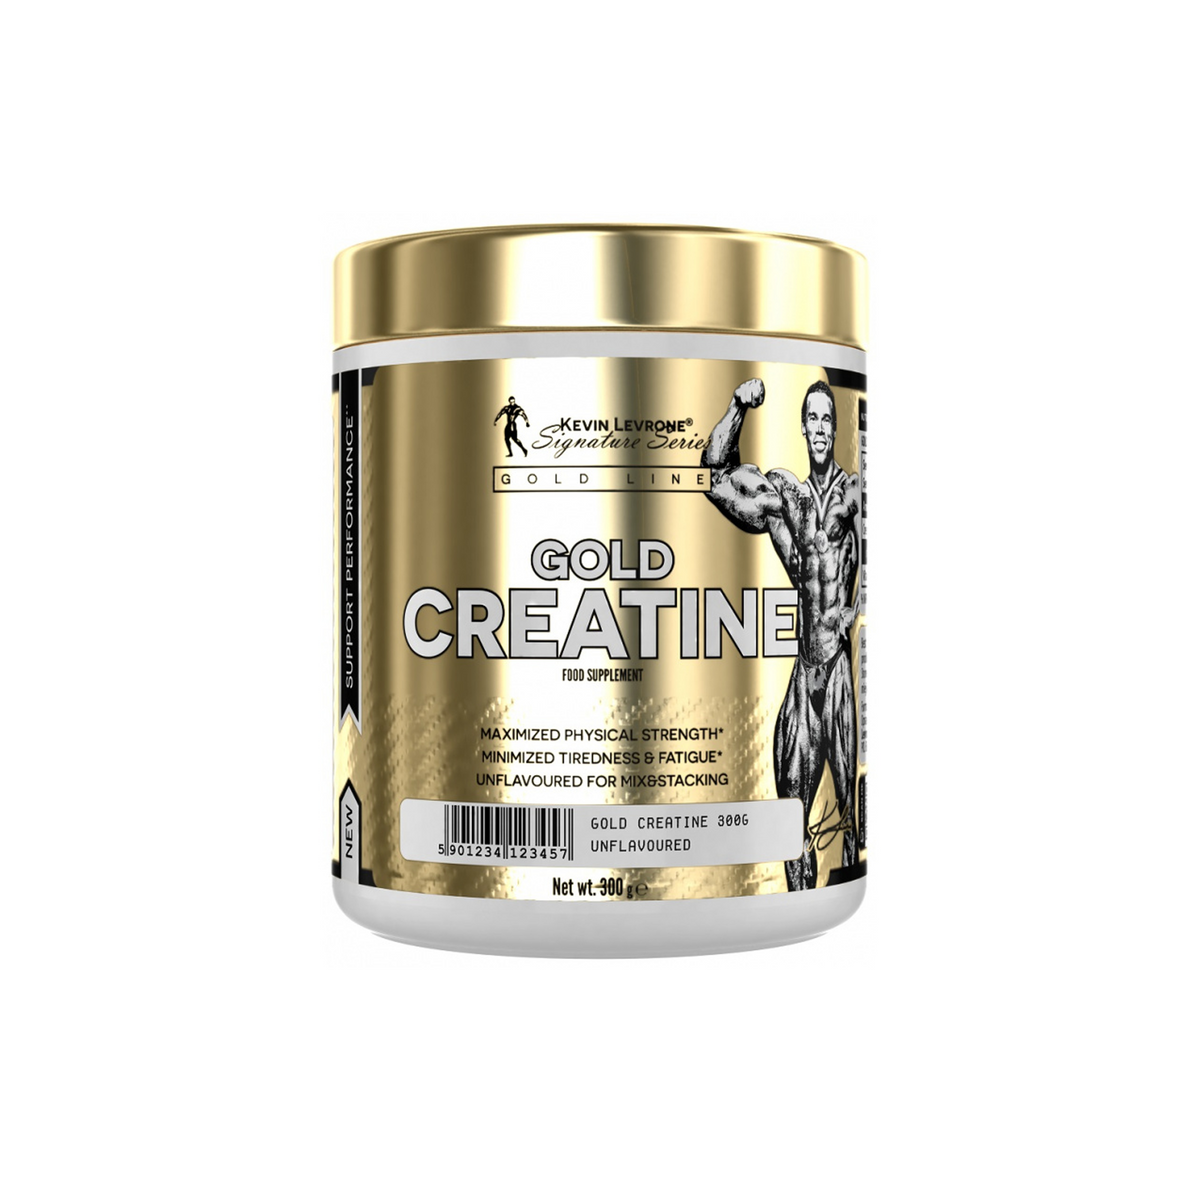 Gold Creatine new - 60 servings